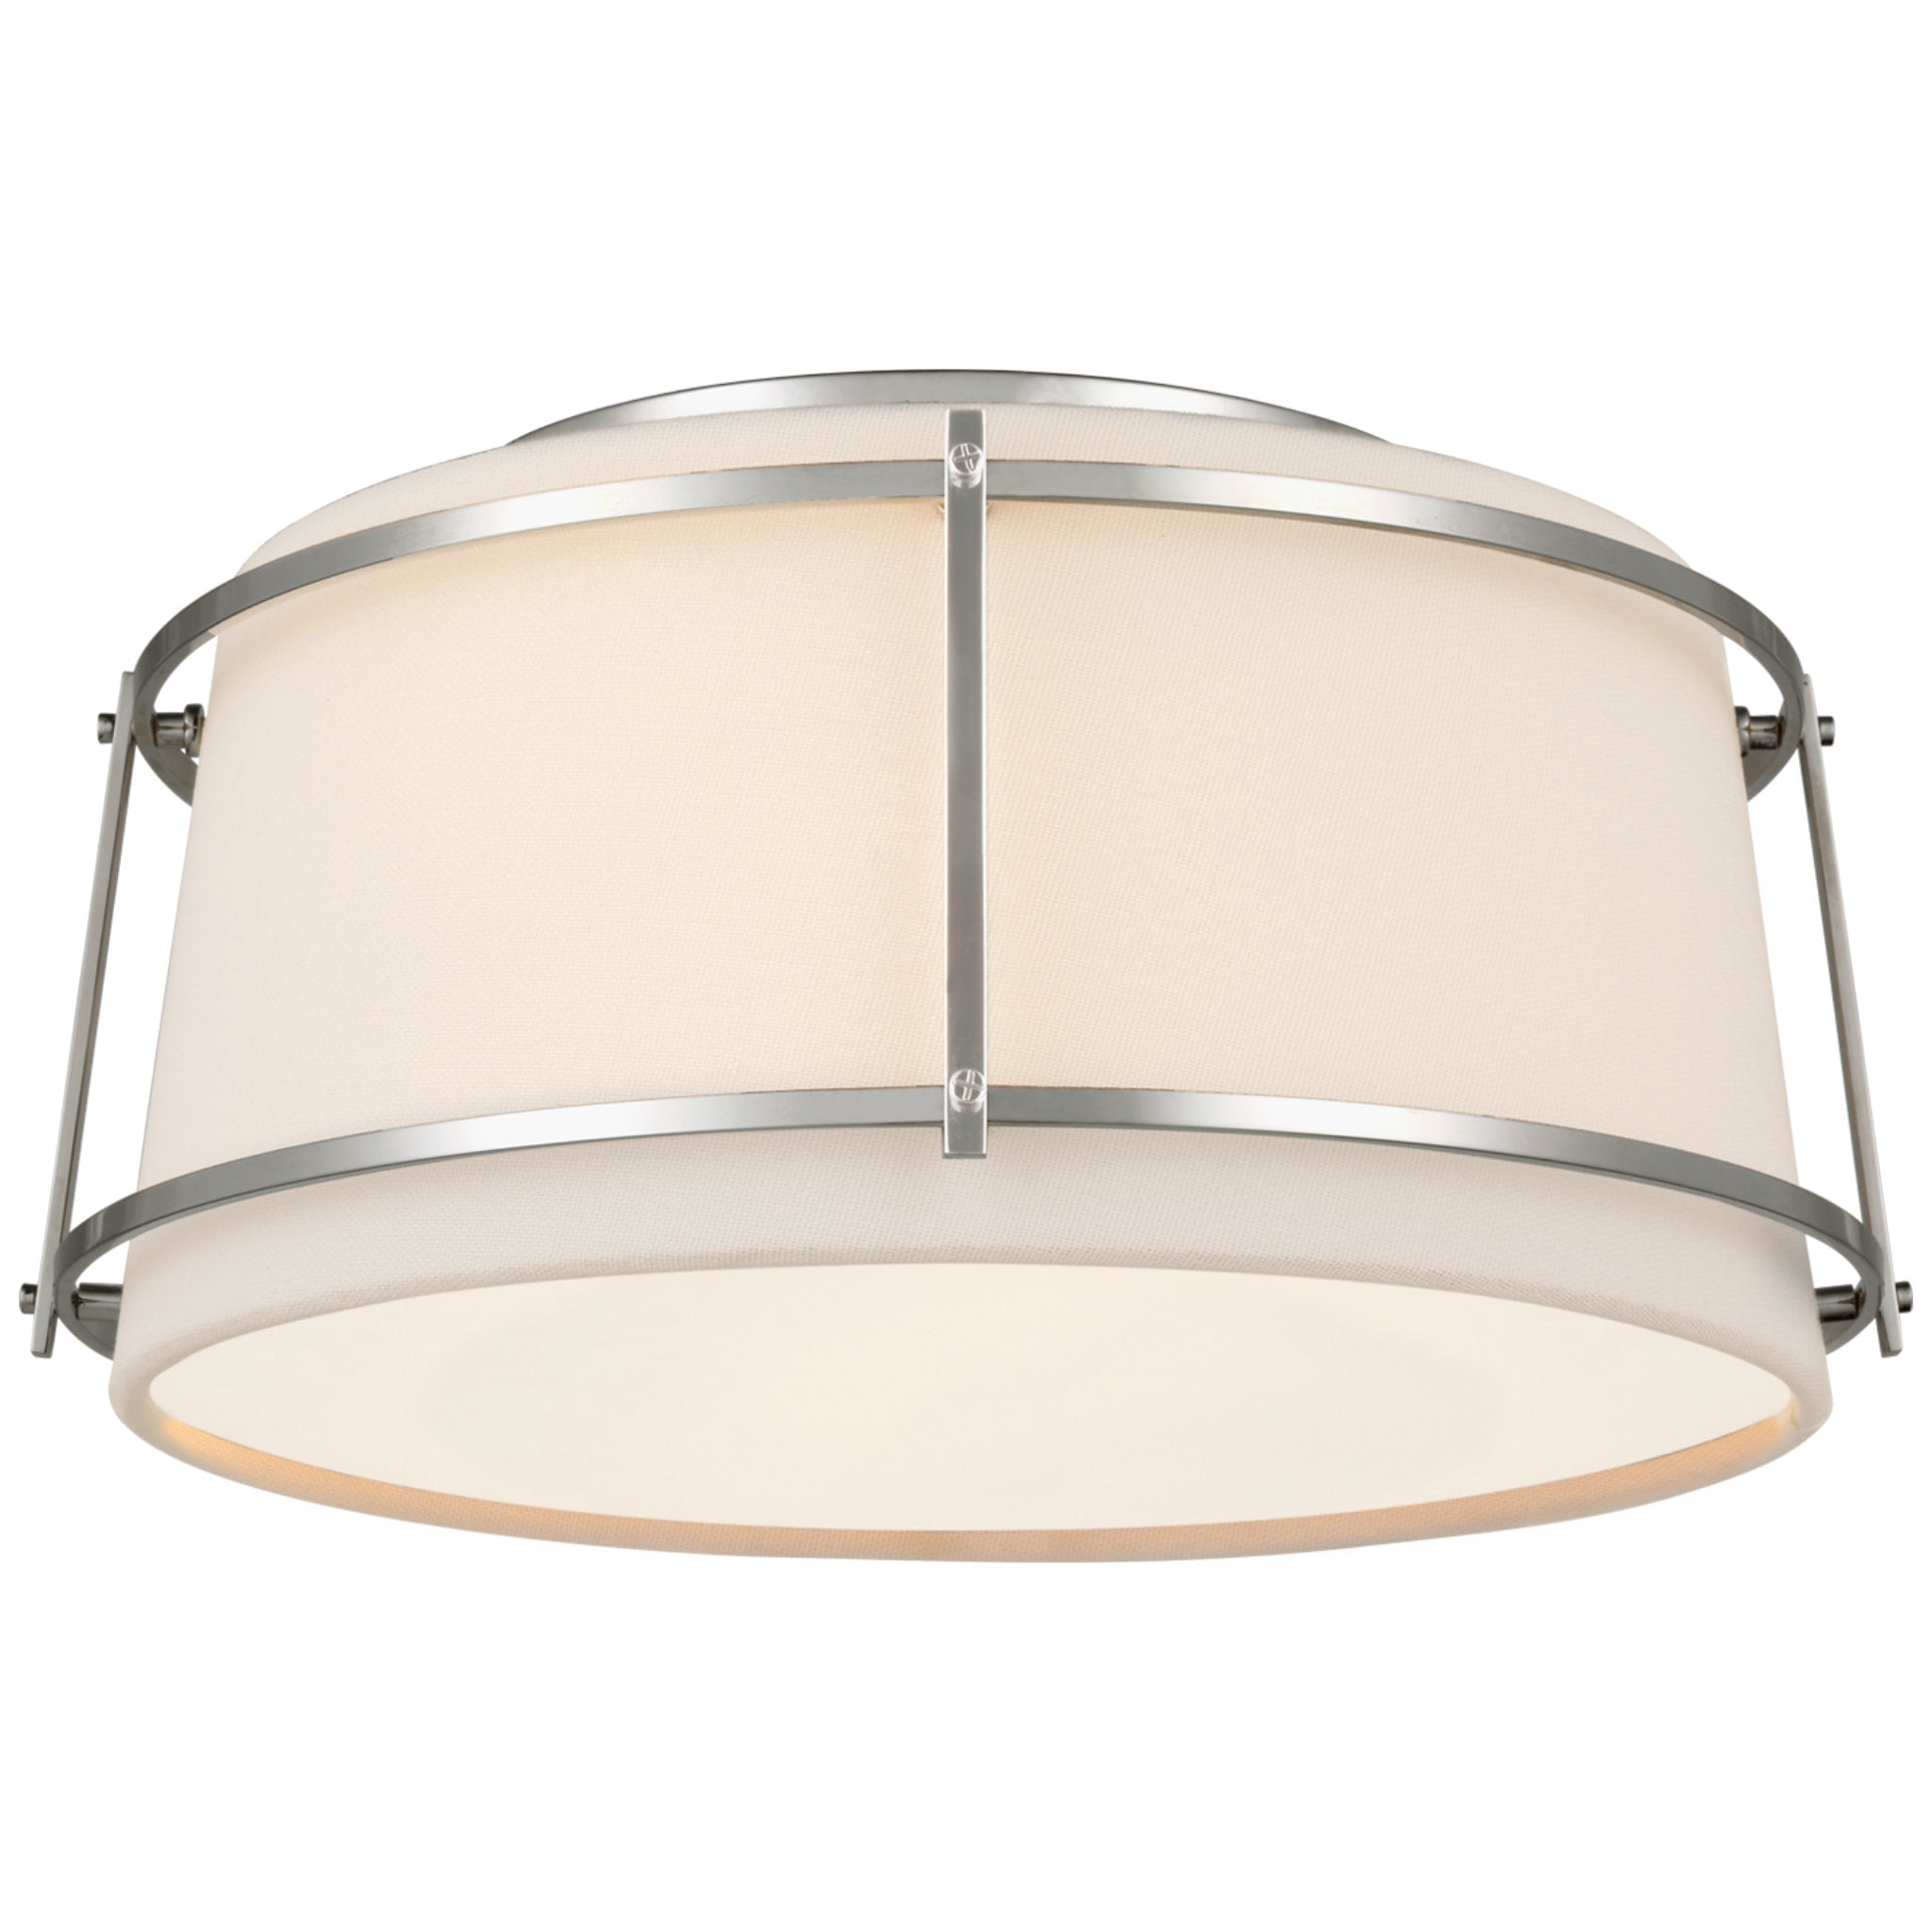 Carrier and Company Callaway Small Flush Mount in Polished Nickel with Linen Shade and Frosted Acrylic Diffuser